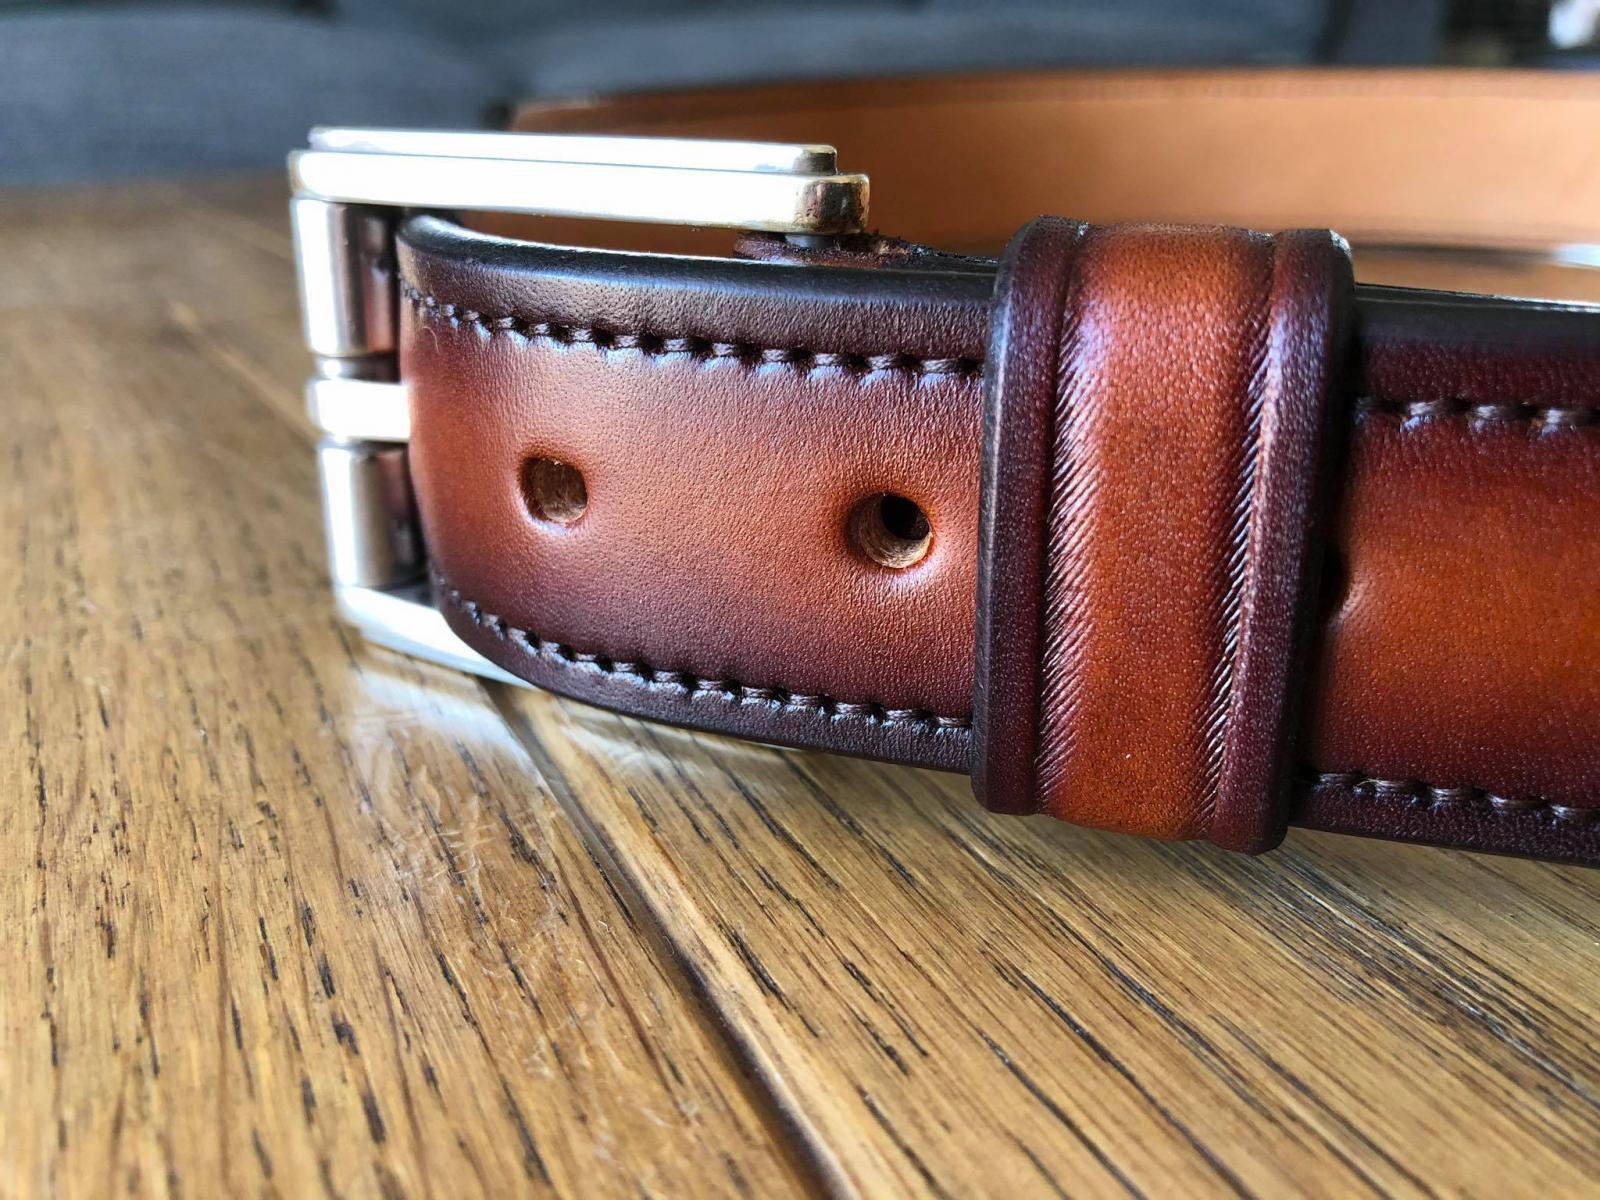 Hand stitched - Our Leatherwork Galleries - Leatherworker.net